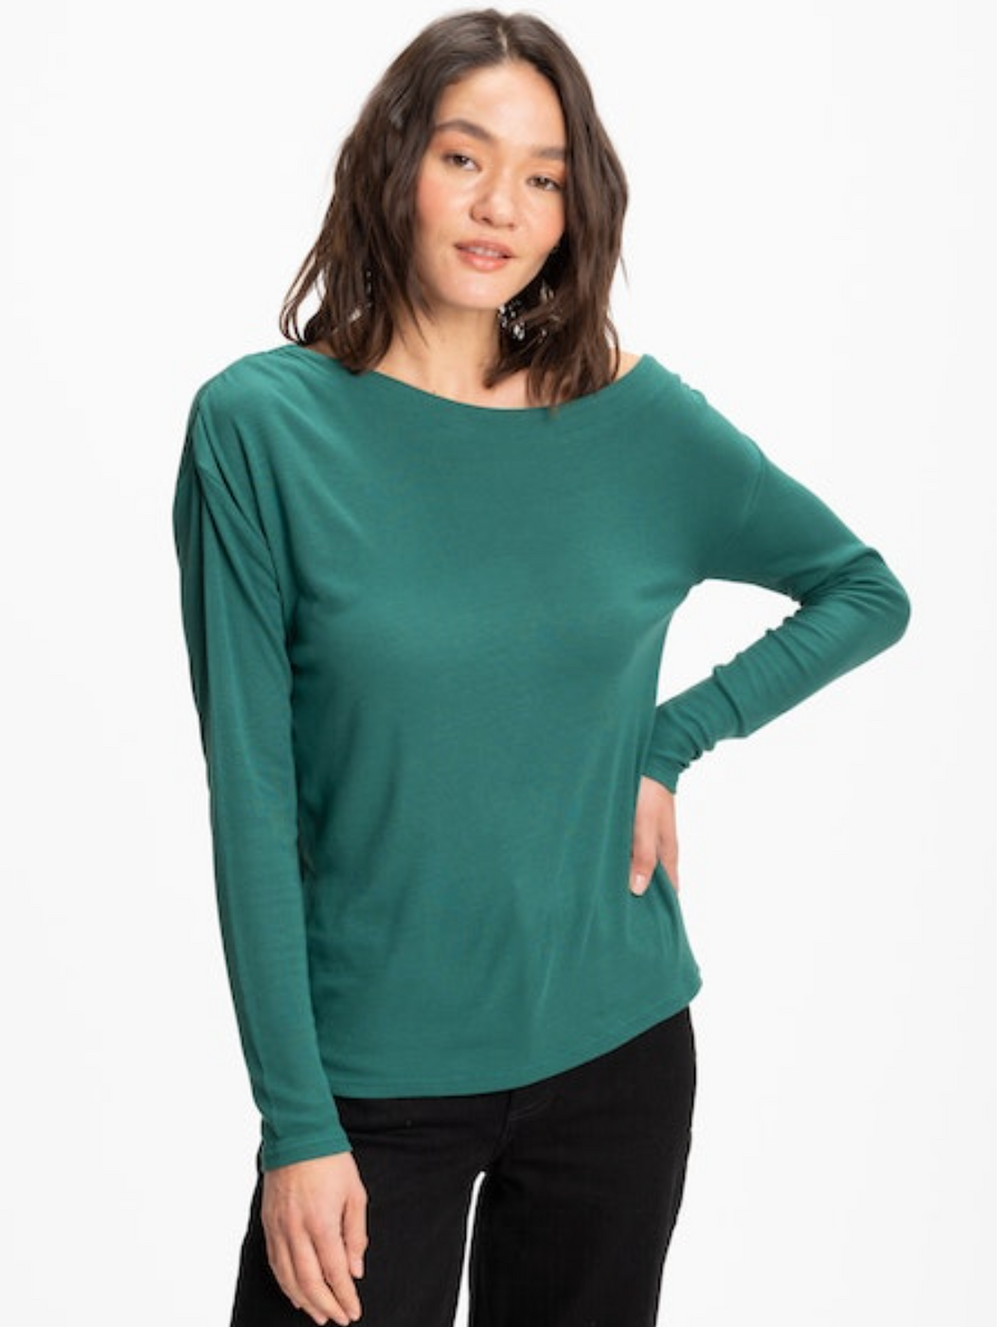 Threads 4 Thought shirt, Leoni ribbed off shoulder